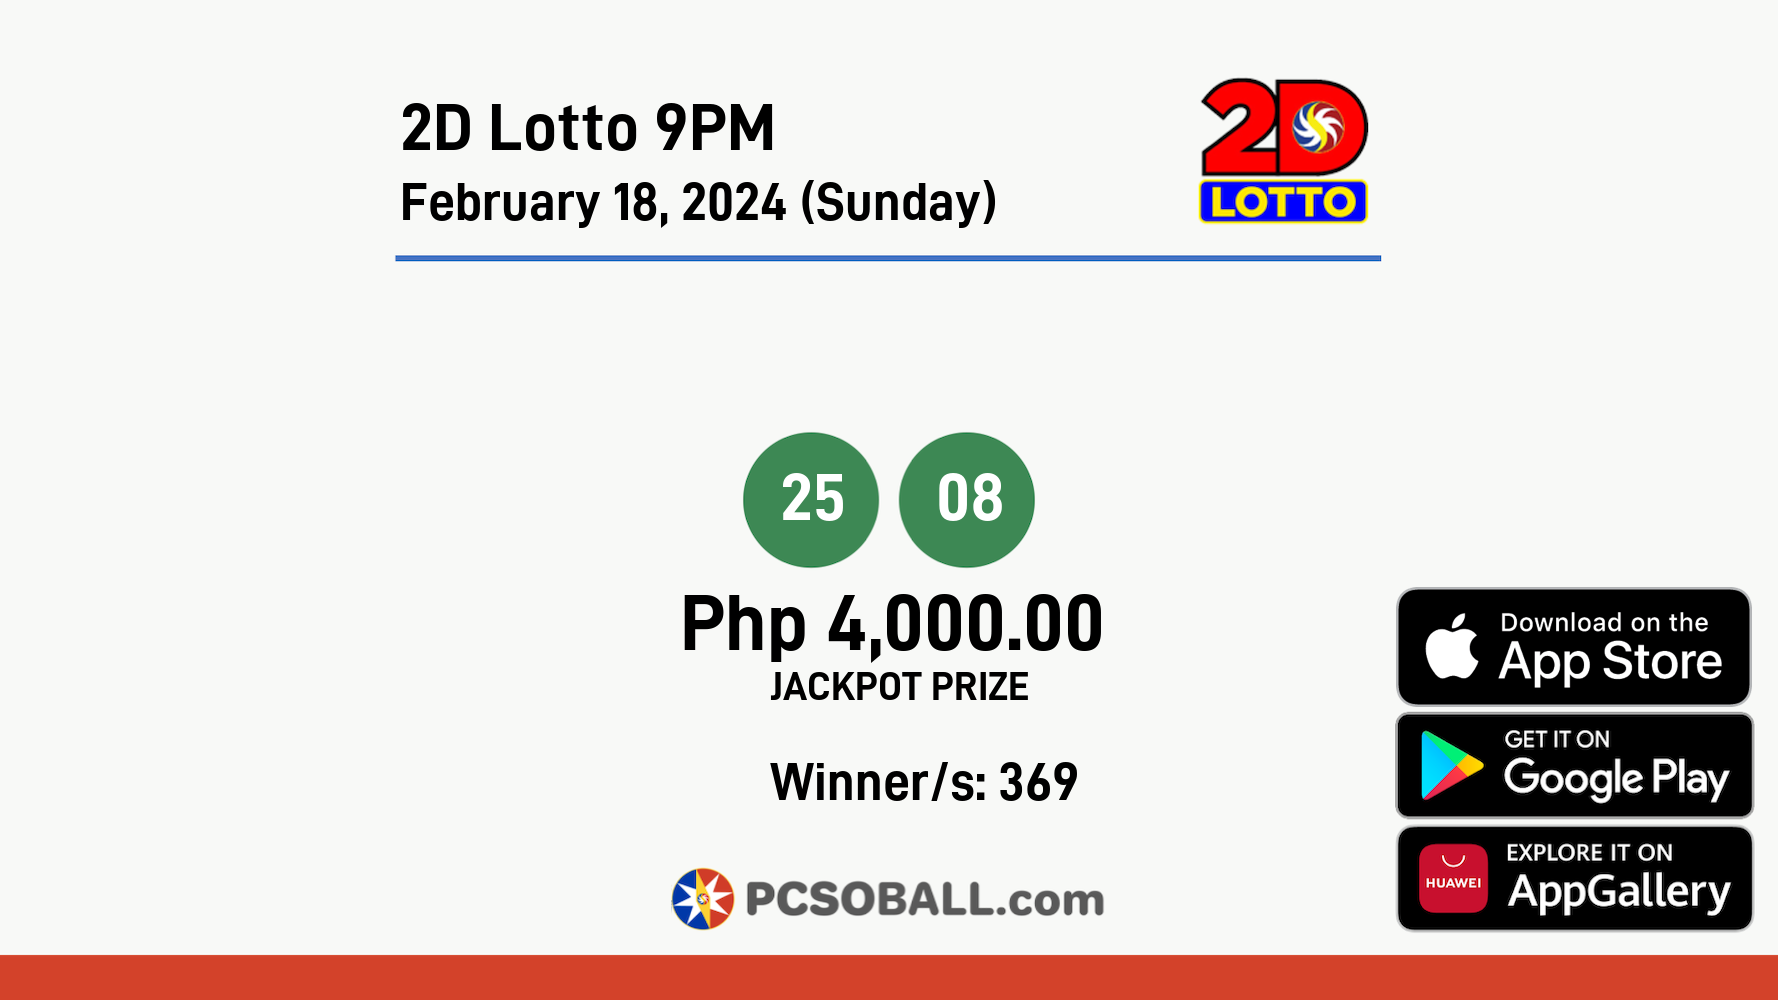 2D Lotto 9PM February 18, 2024 (Sunday) Result